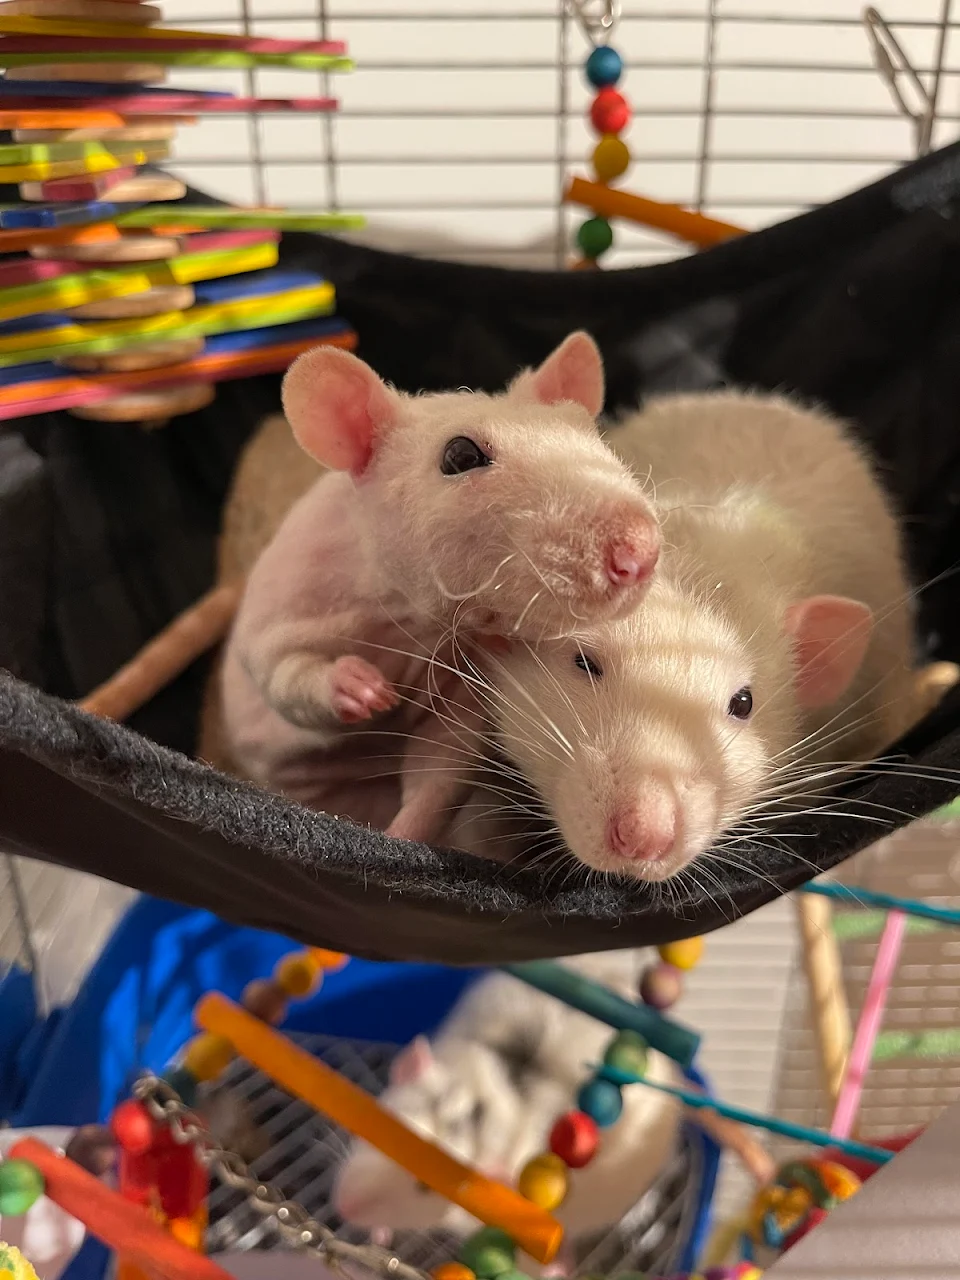 Are a trio of polite rats ‘aww’ worthy?